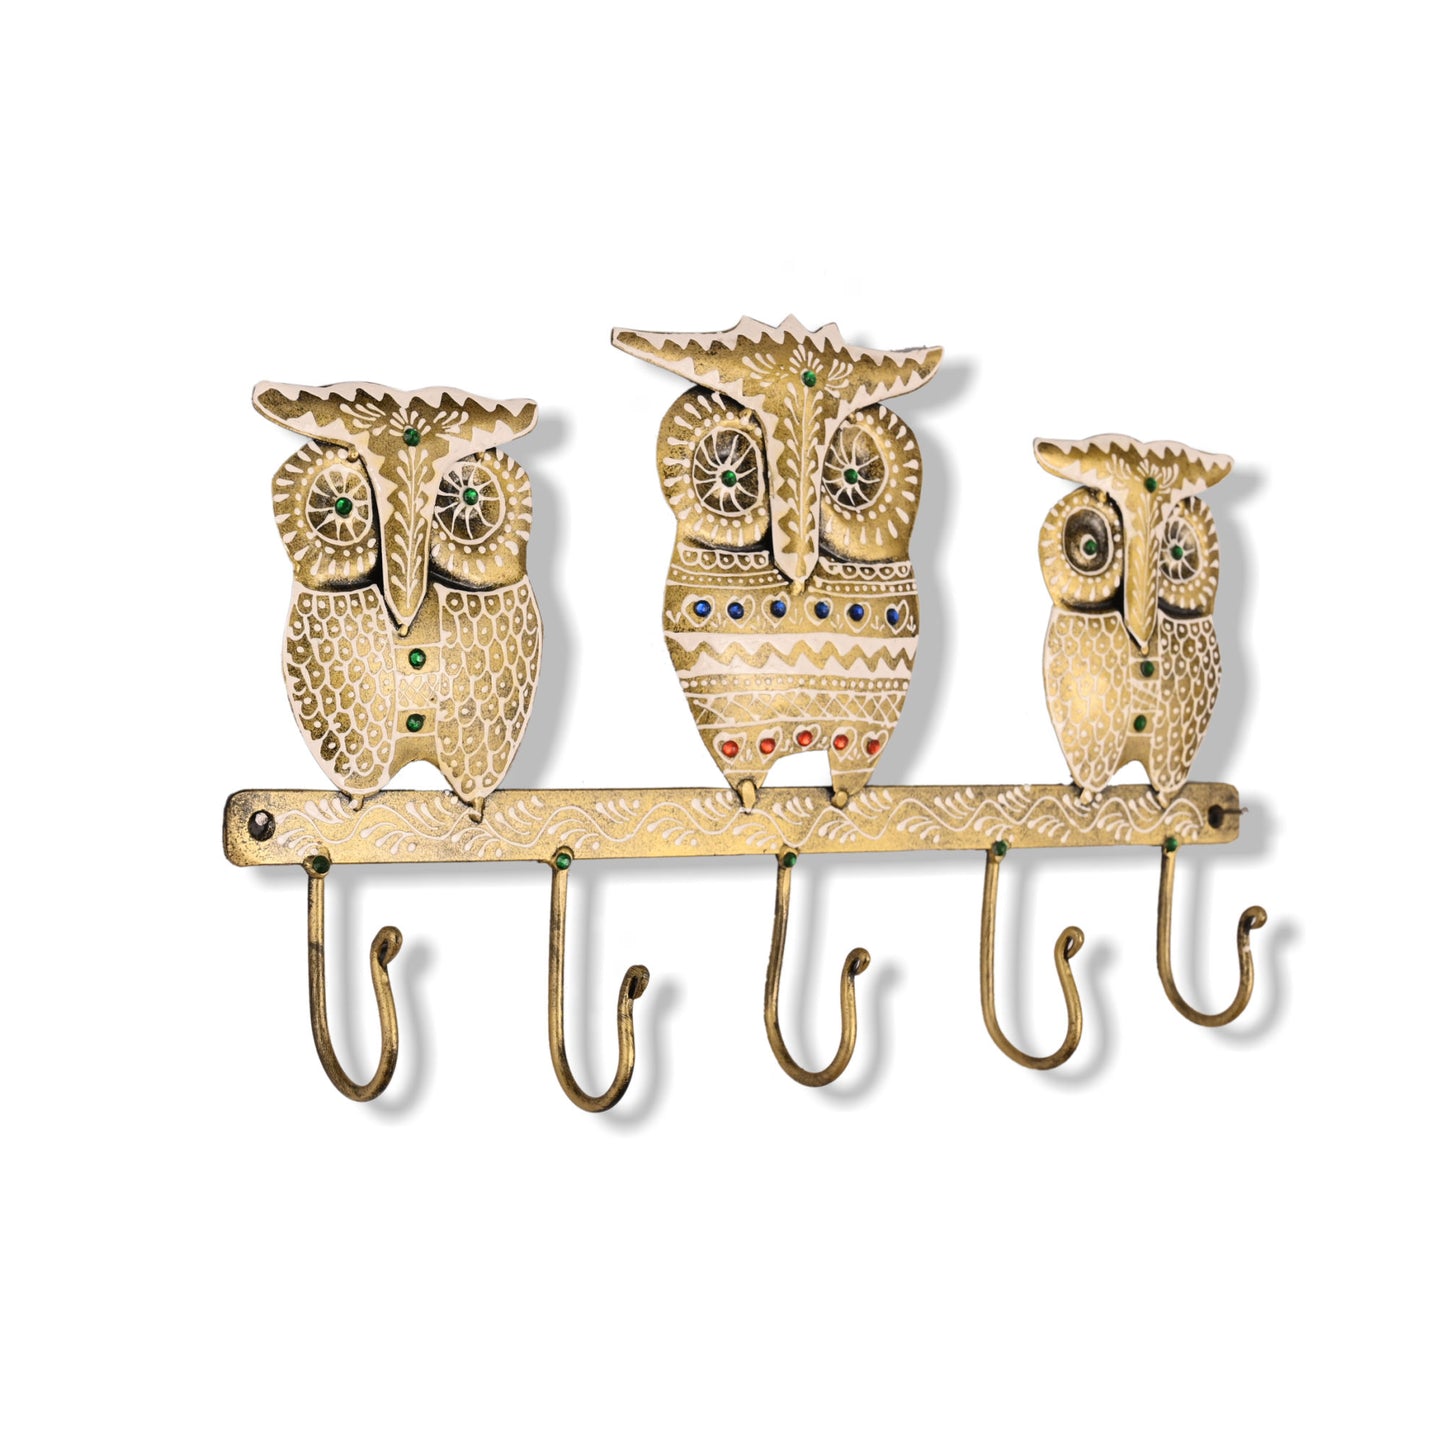 WILLART Handmade and Hand Painted Antique Owl Shape Metal Wall Hanging Antique 5 Key Storage Hooks Key Holder Coat Hanger for Home Décor Wall Décor (35.50 cm x 21.50 cm)